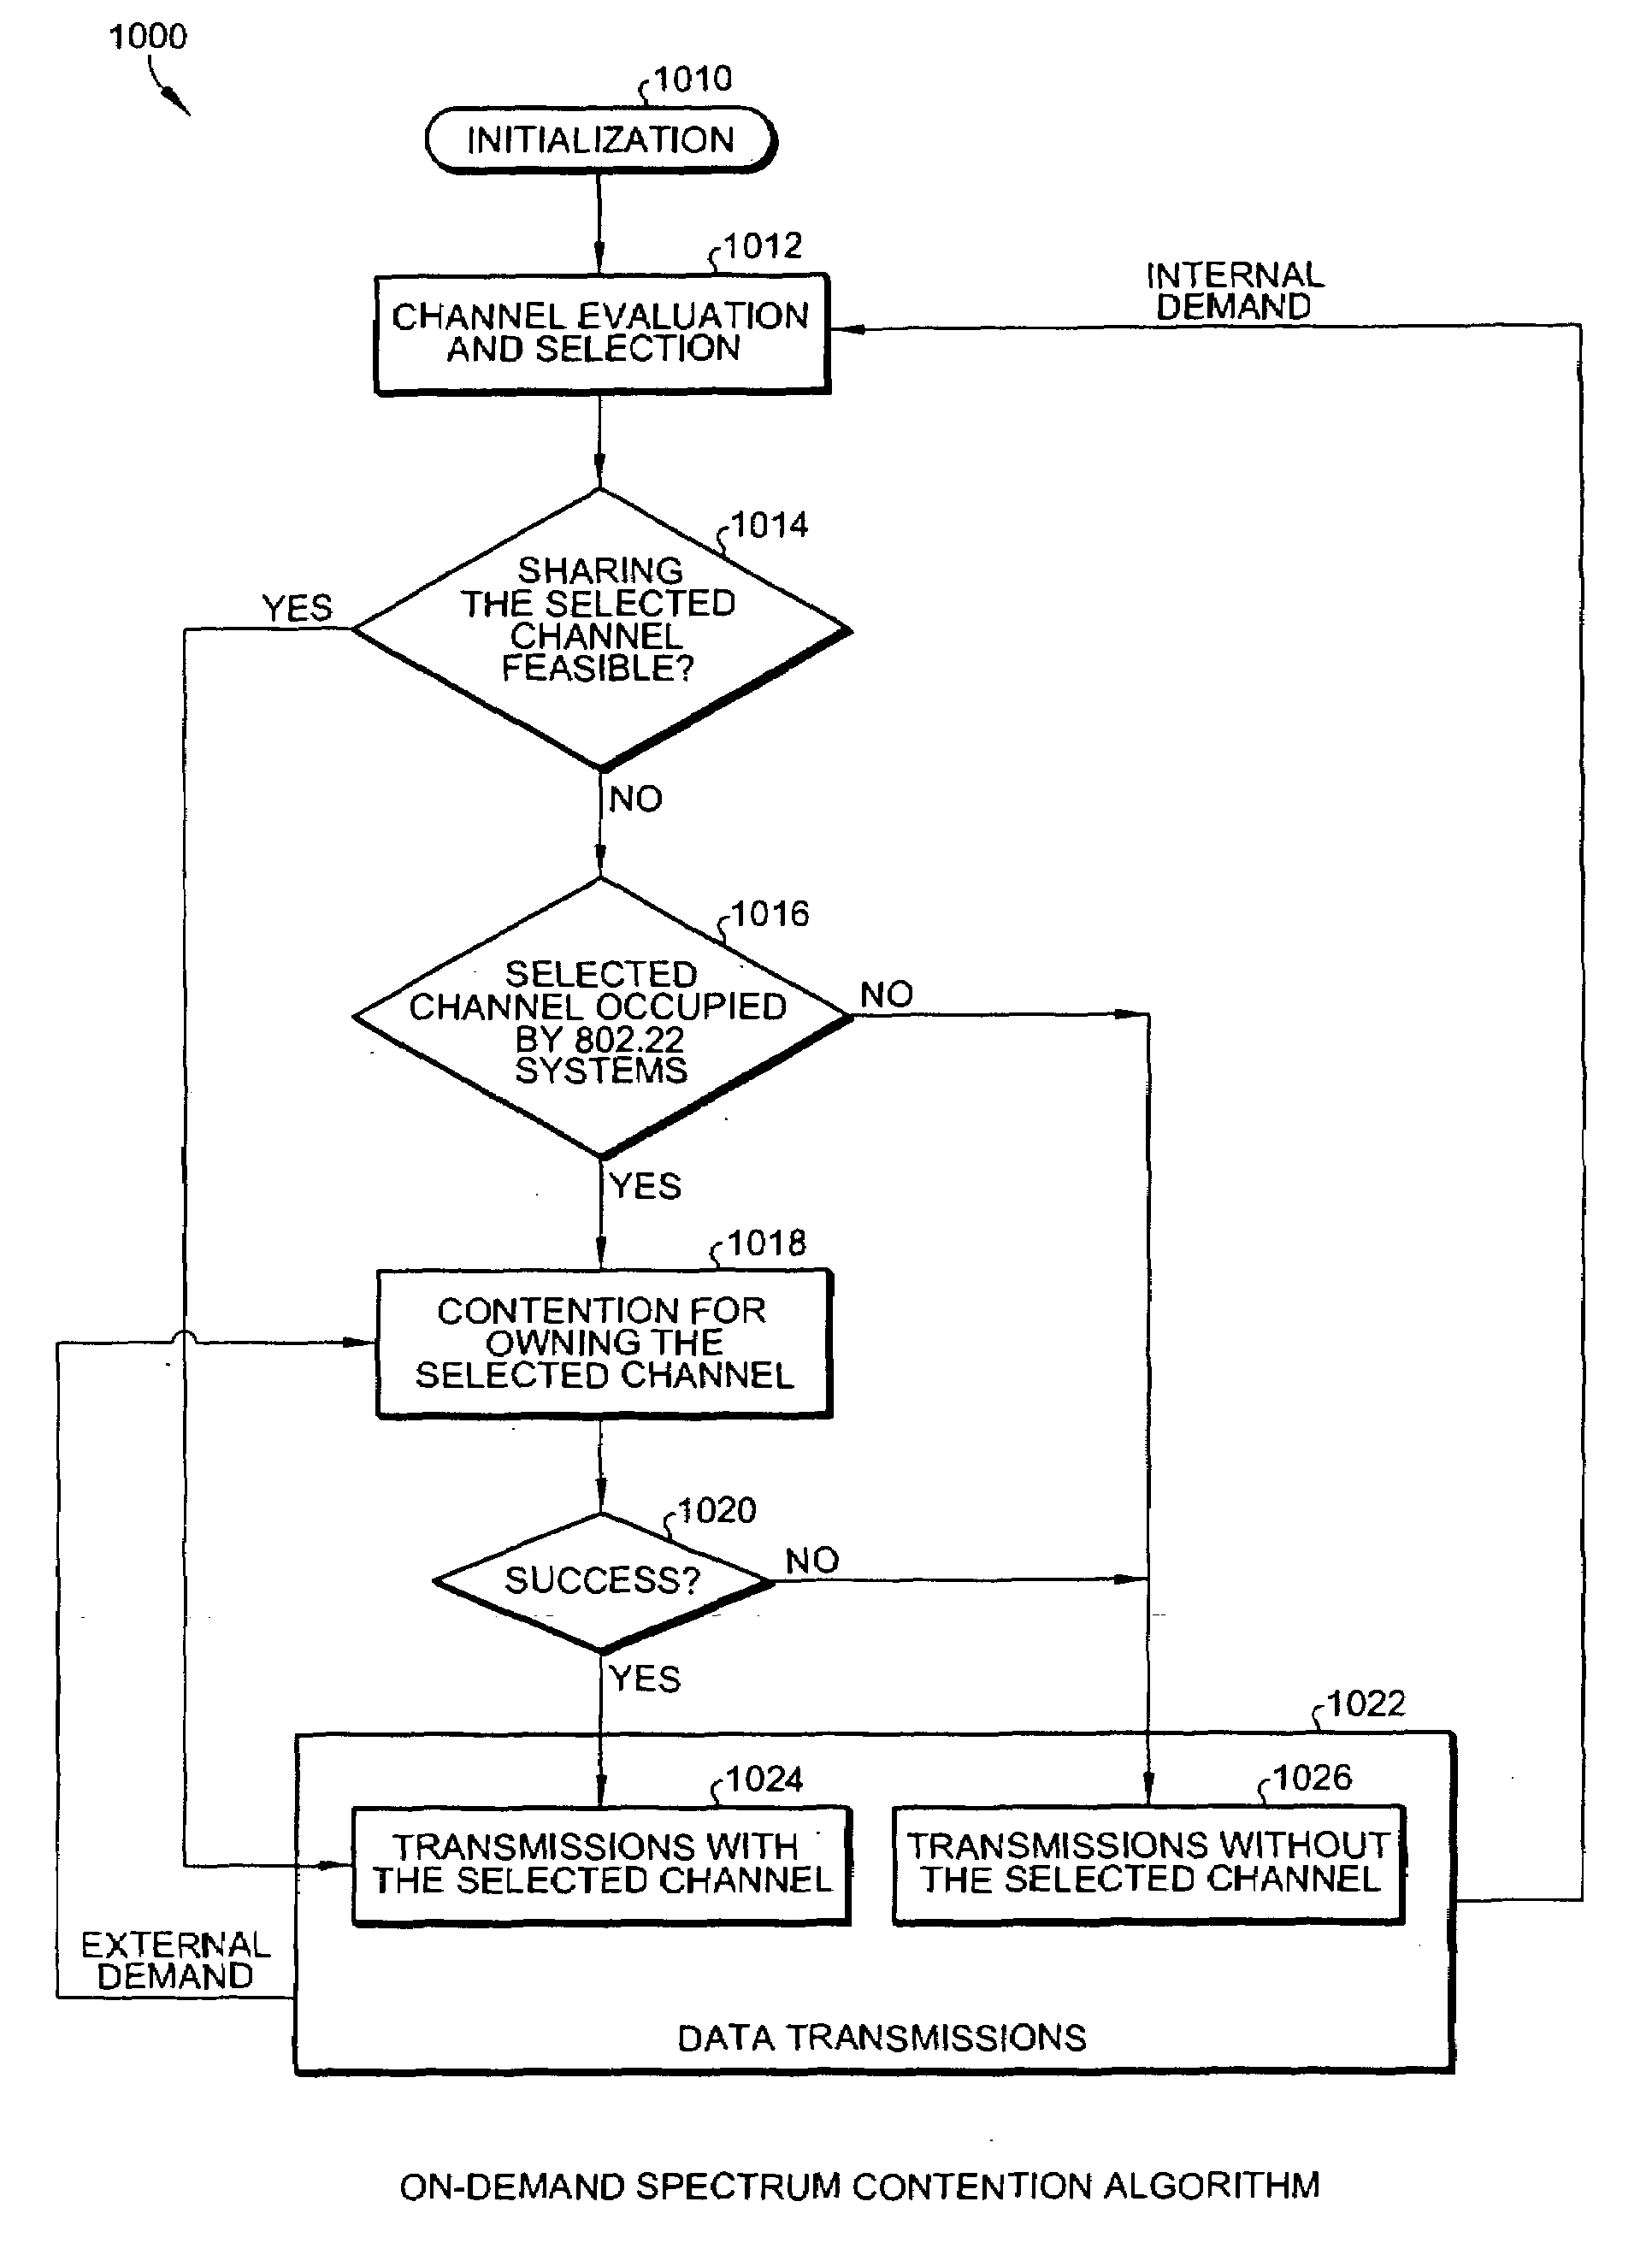 Methods of RF sensing control and dynamic frequency selection control for cognitive radio based dynamic spectrum access network systems-cognitive dynamic frequency hopping